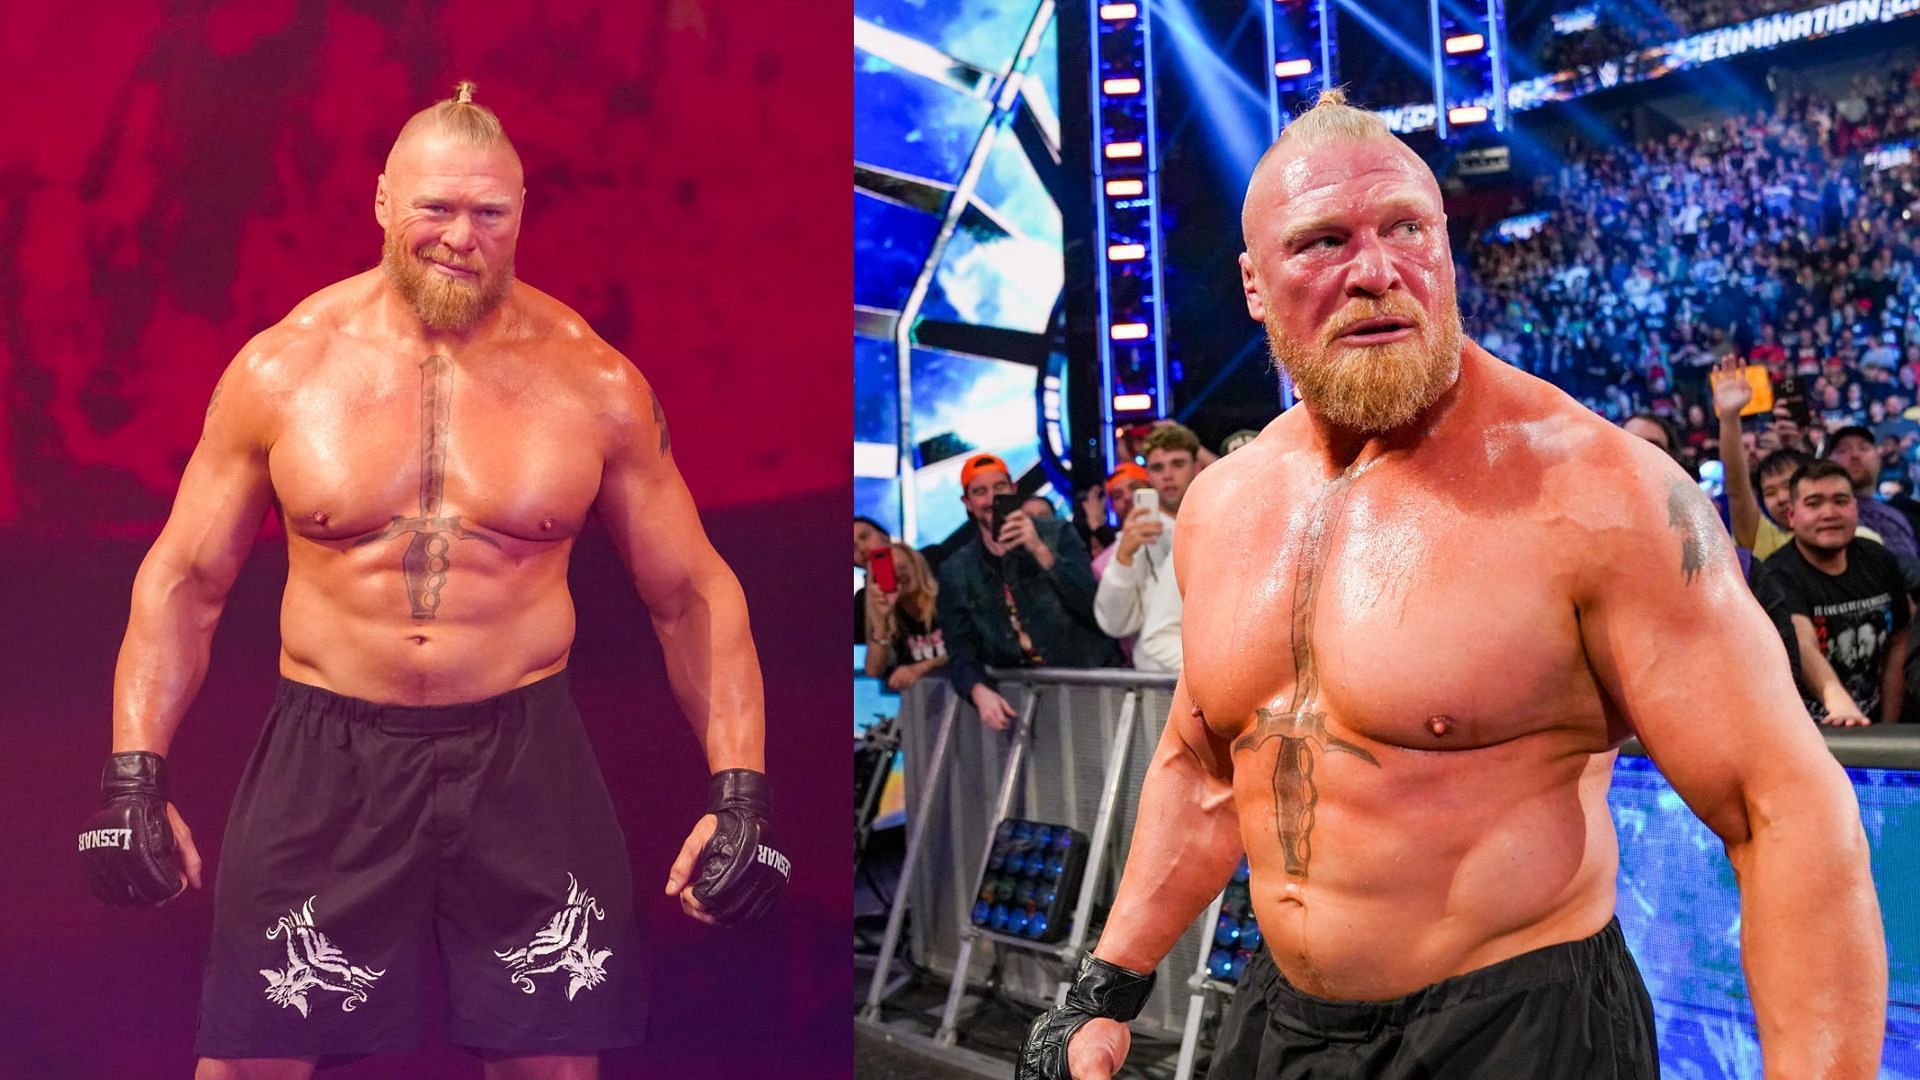 Brock Lesnar has been a dominant force in WWE